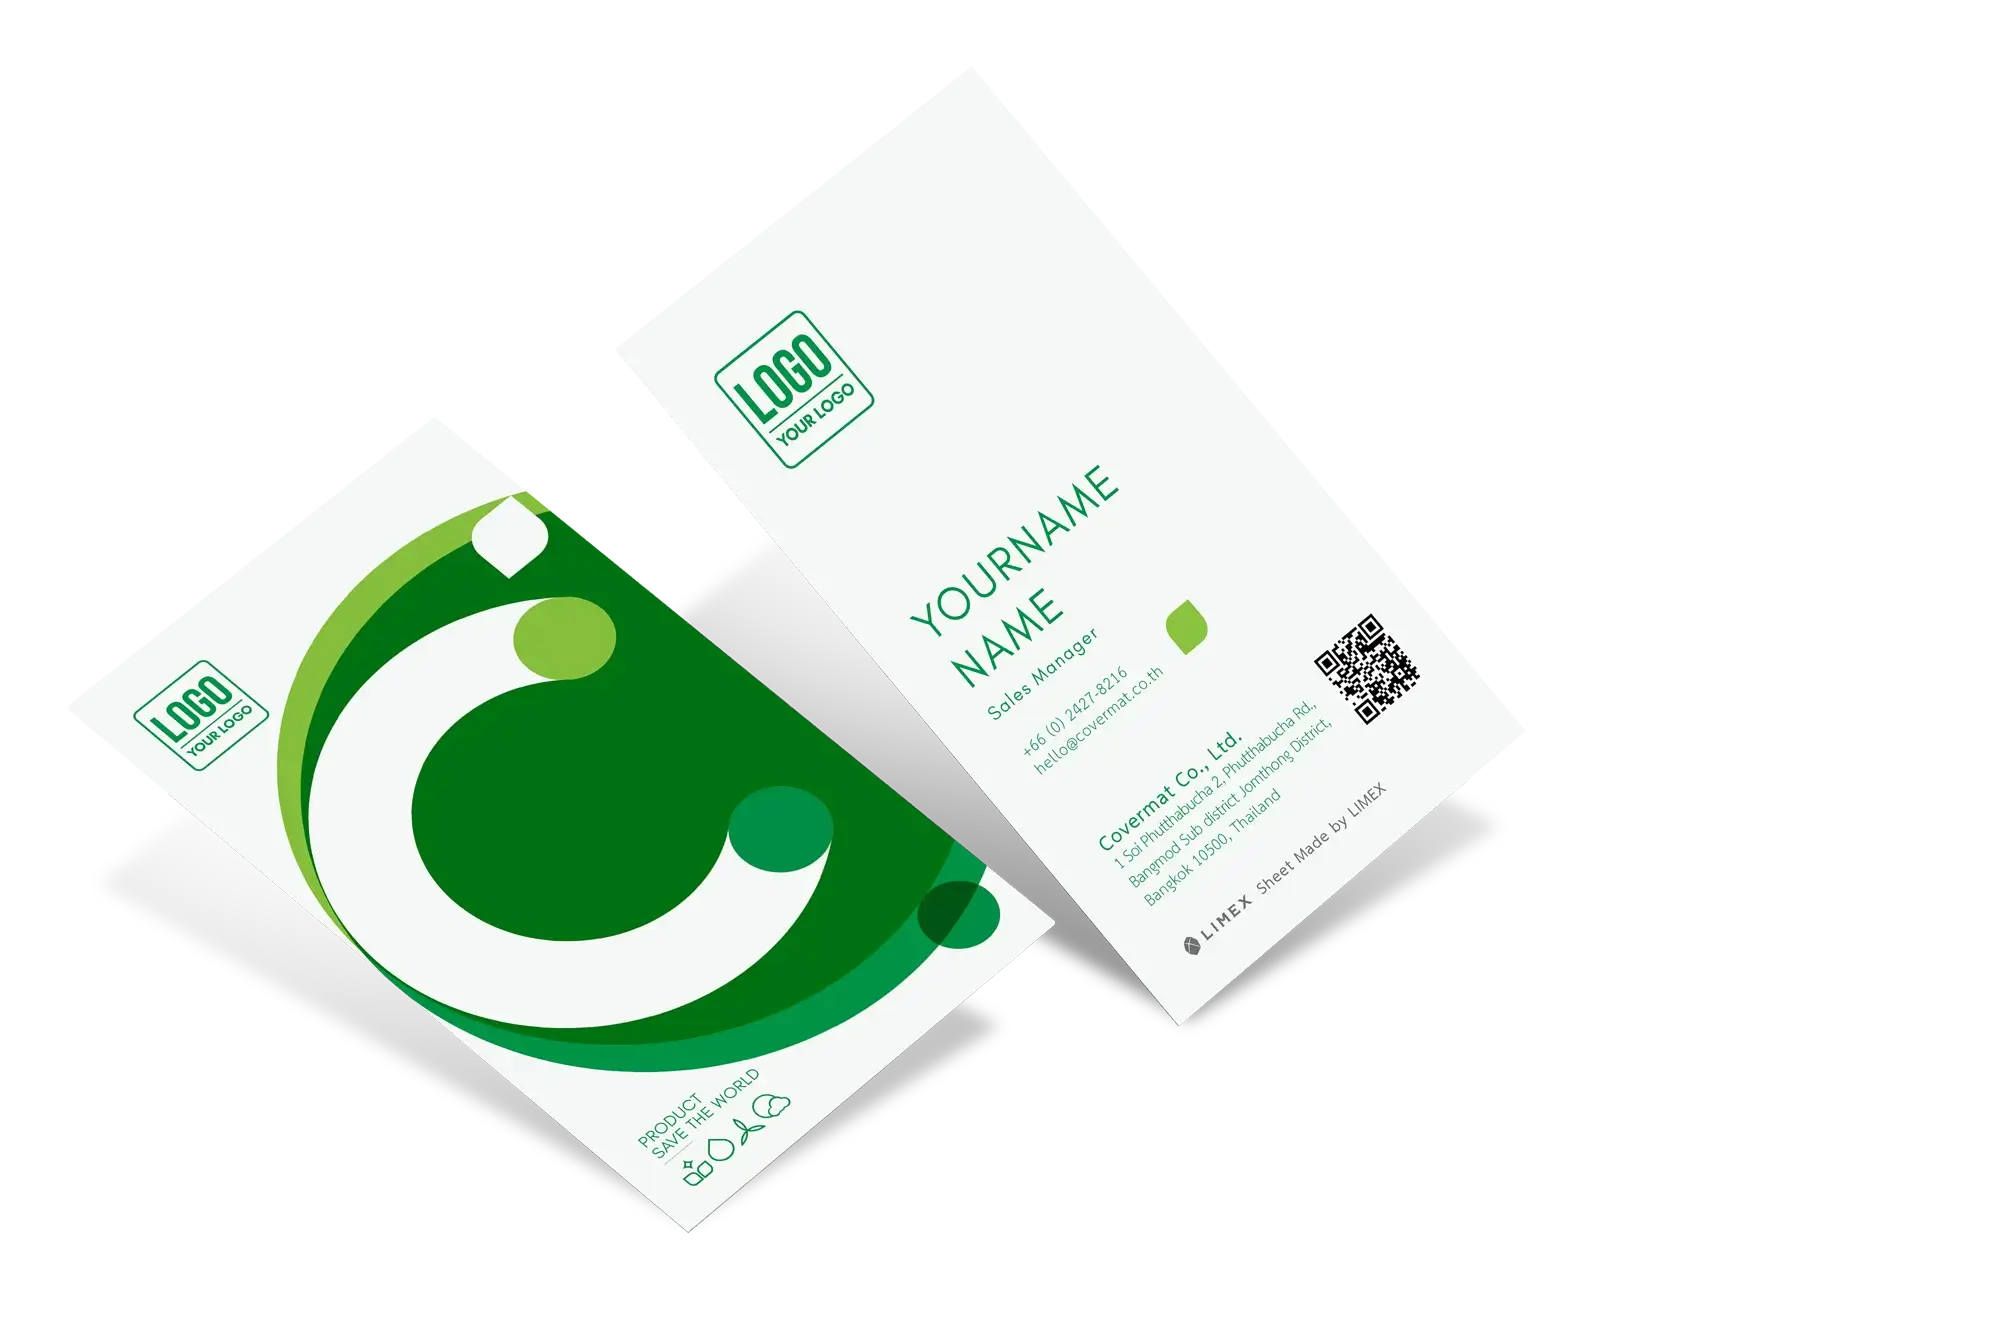 GREEN COVERMAT BUSINESS CARD 1